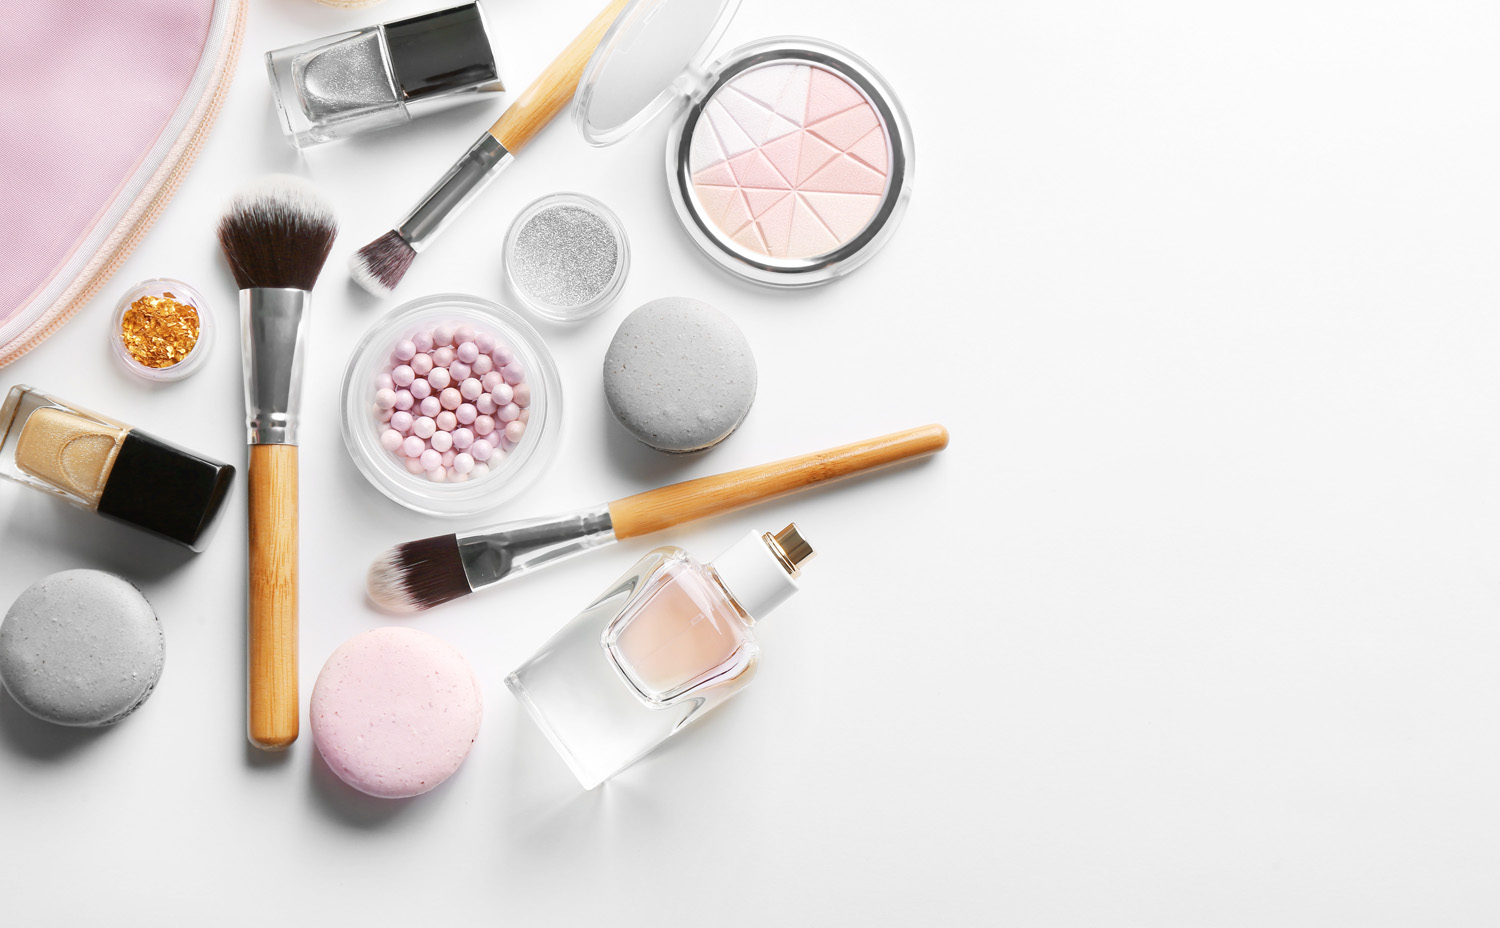 How Much Does the Average Woman Spend on Makeup Per Month?